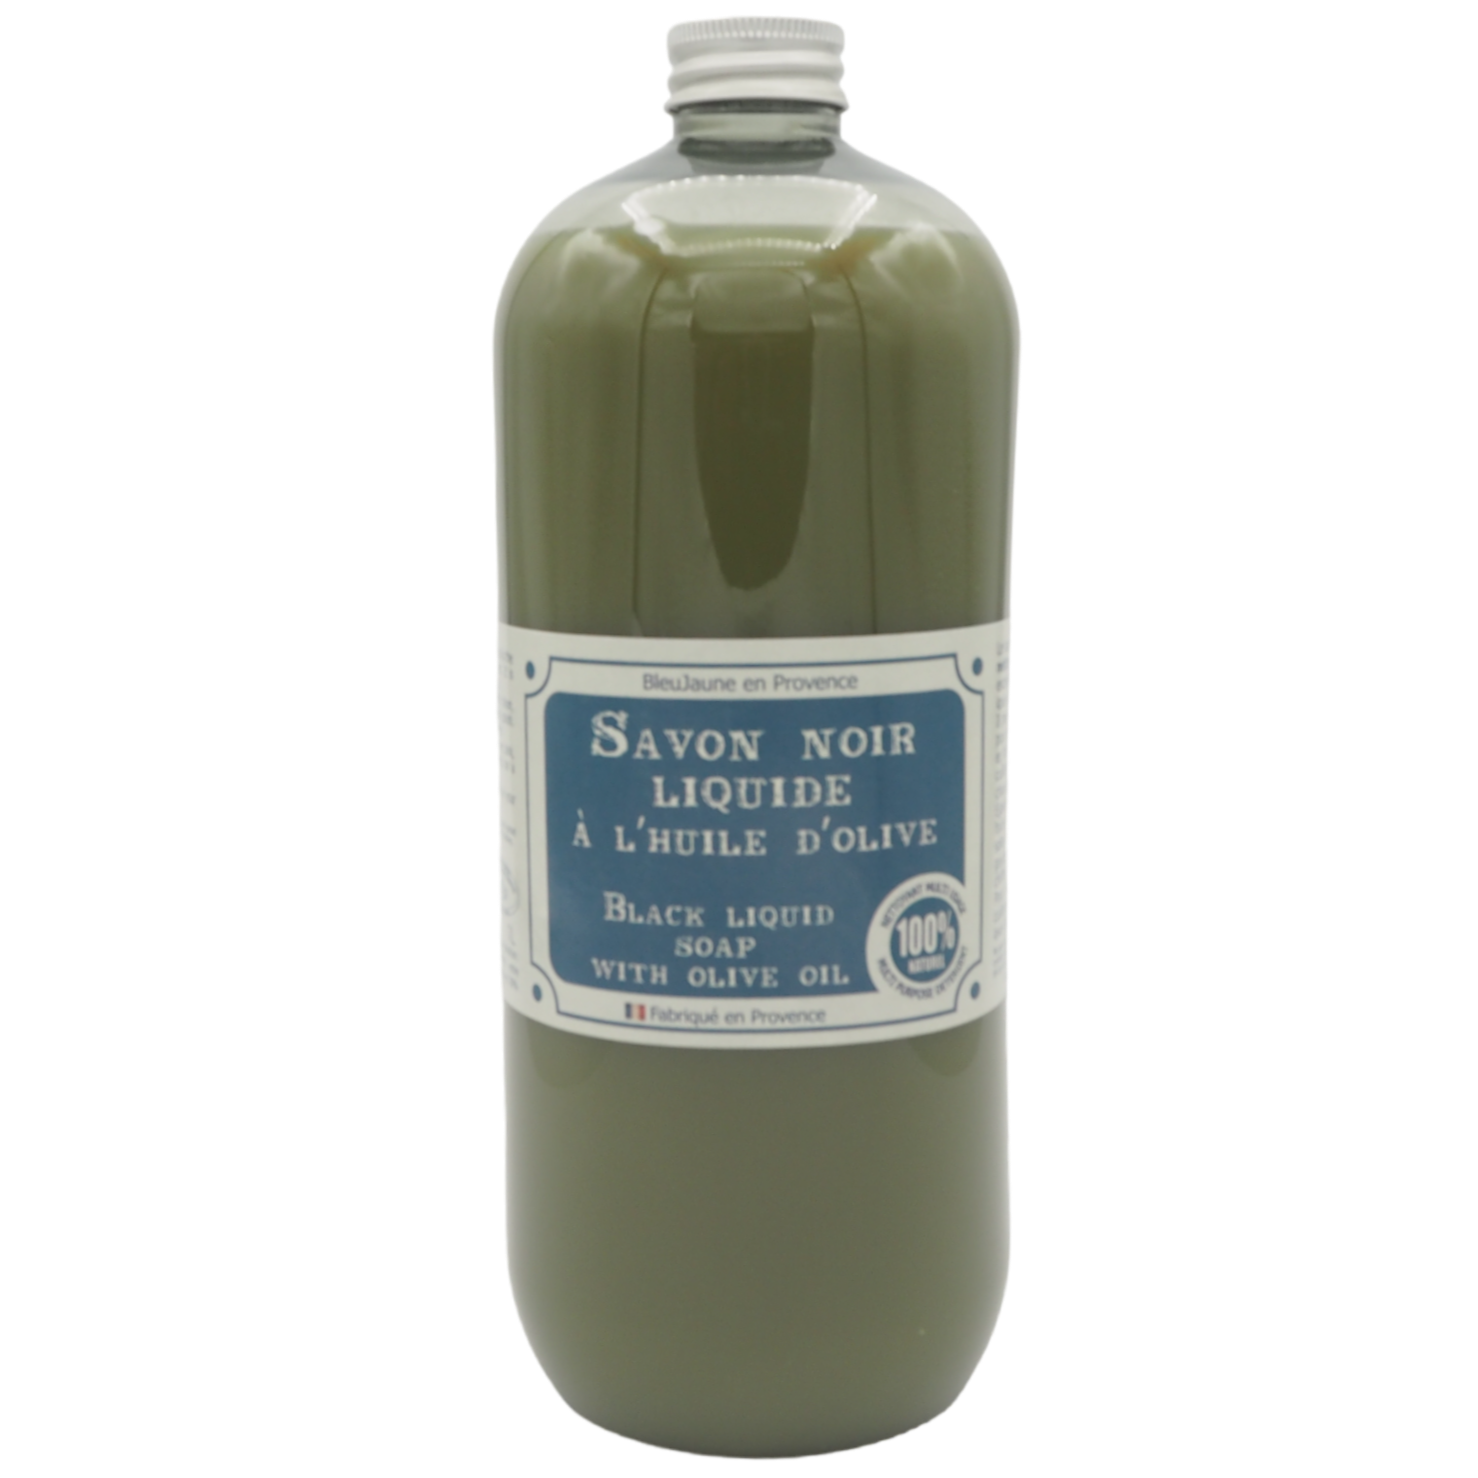 Black Liquid Soap with Olive Oil | 1L